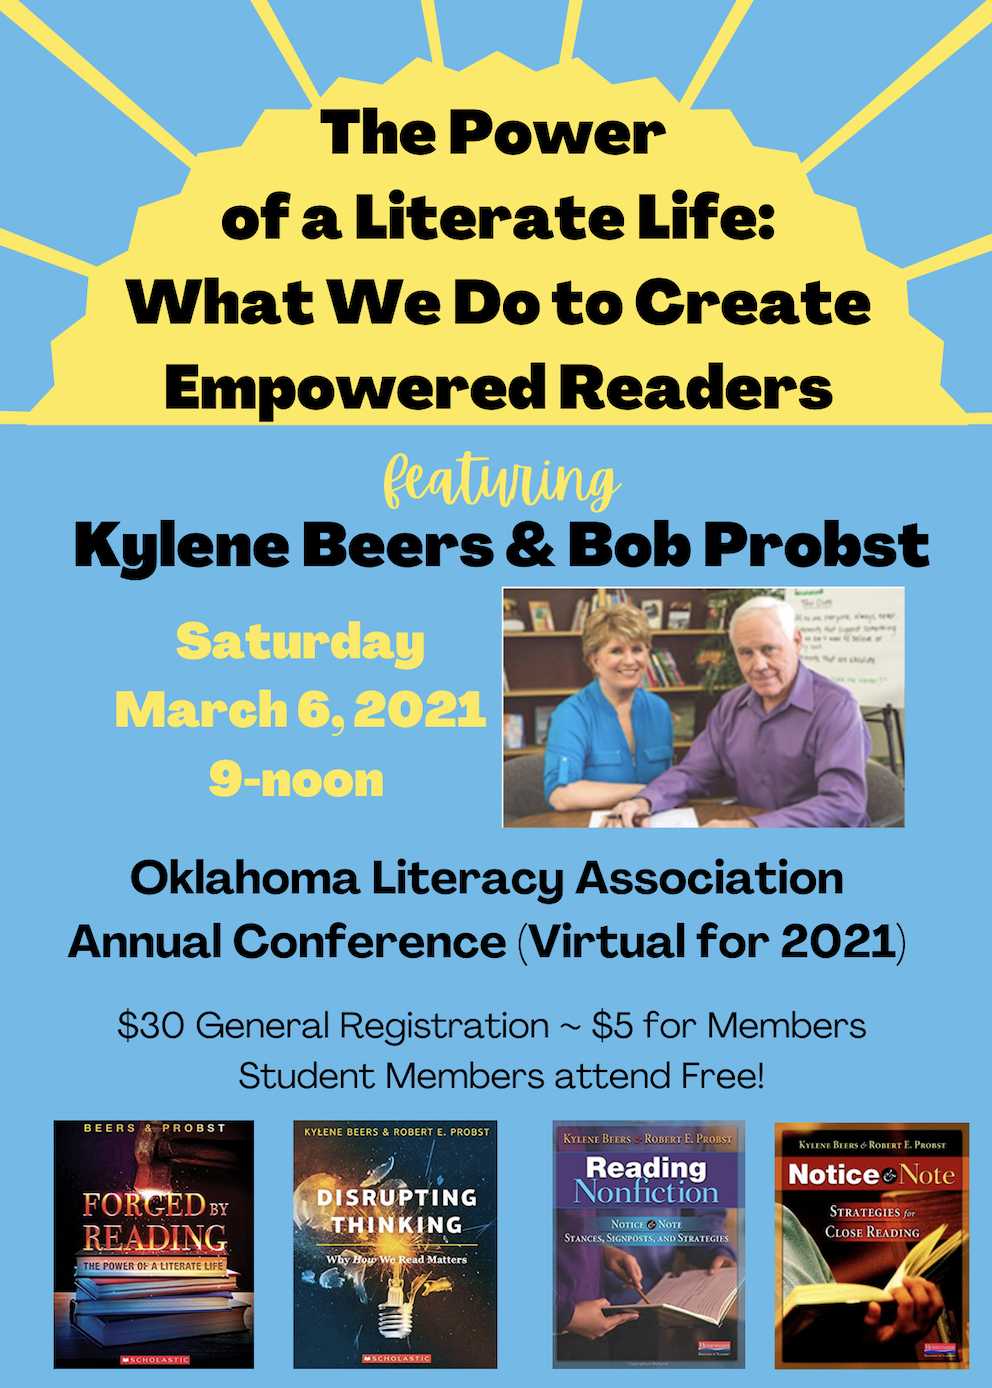 Oklahoma Literacy Association Annual Conference